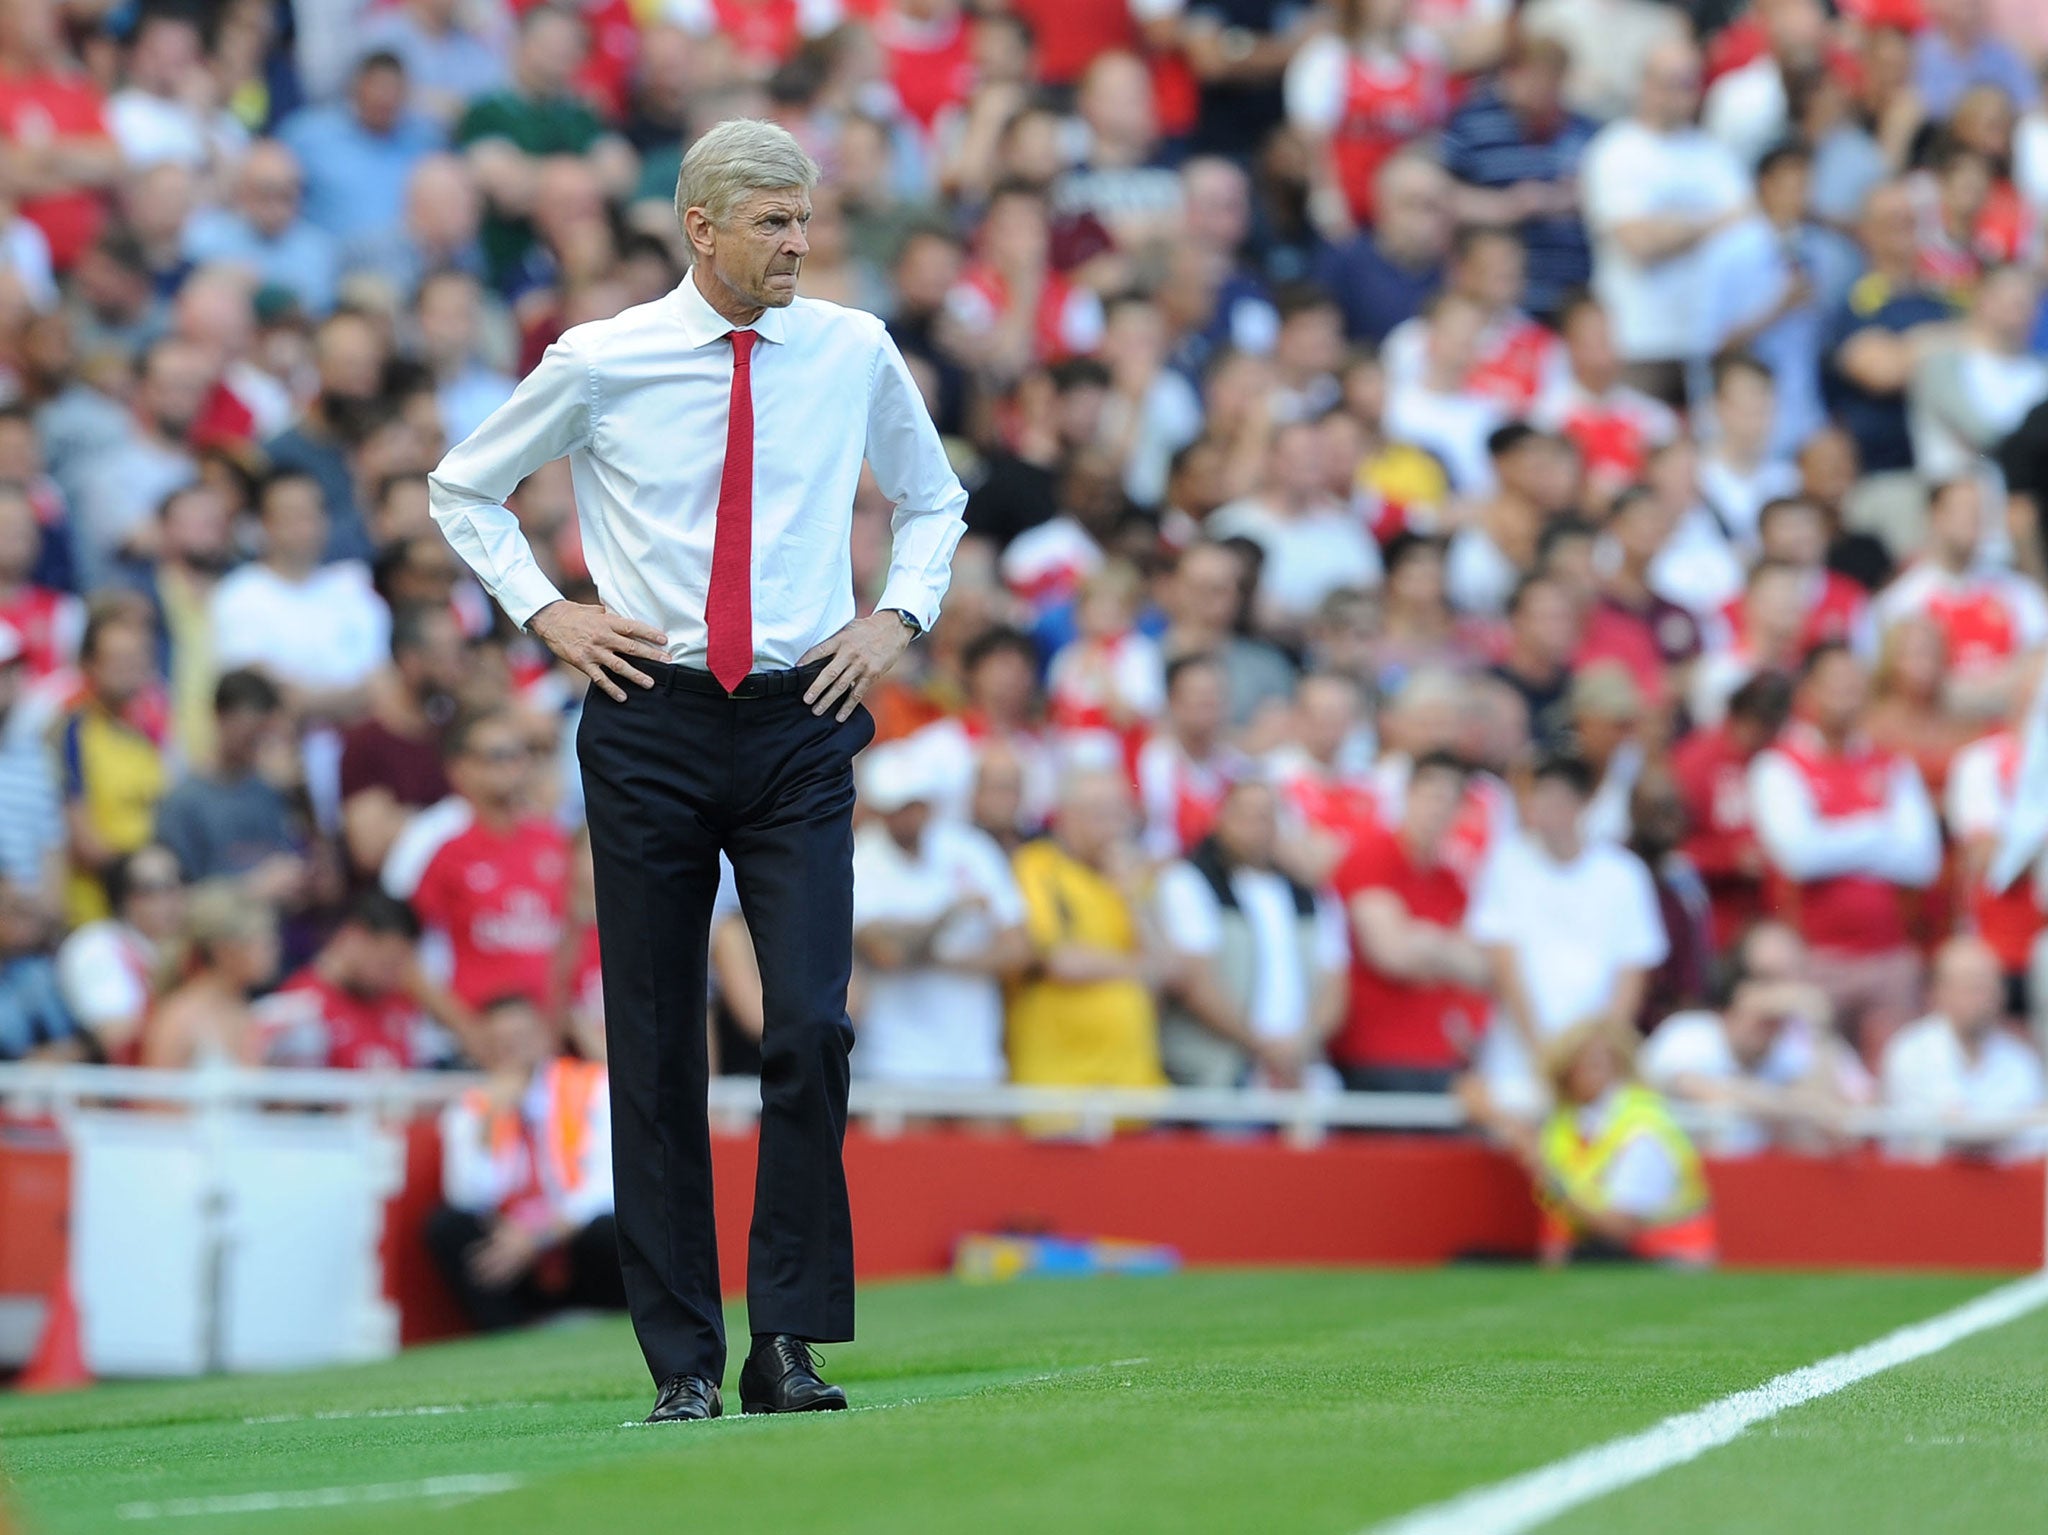 Arsene Wenger has admitted he cannot imagine walking away from the beautiful game